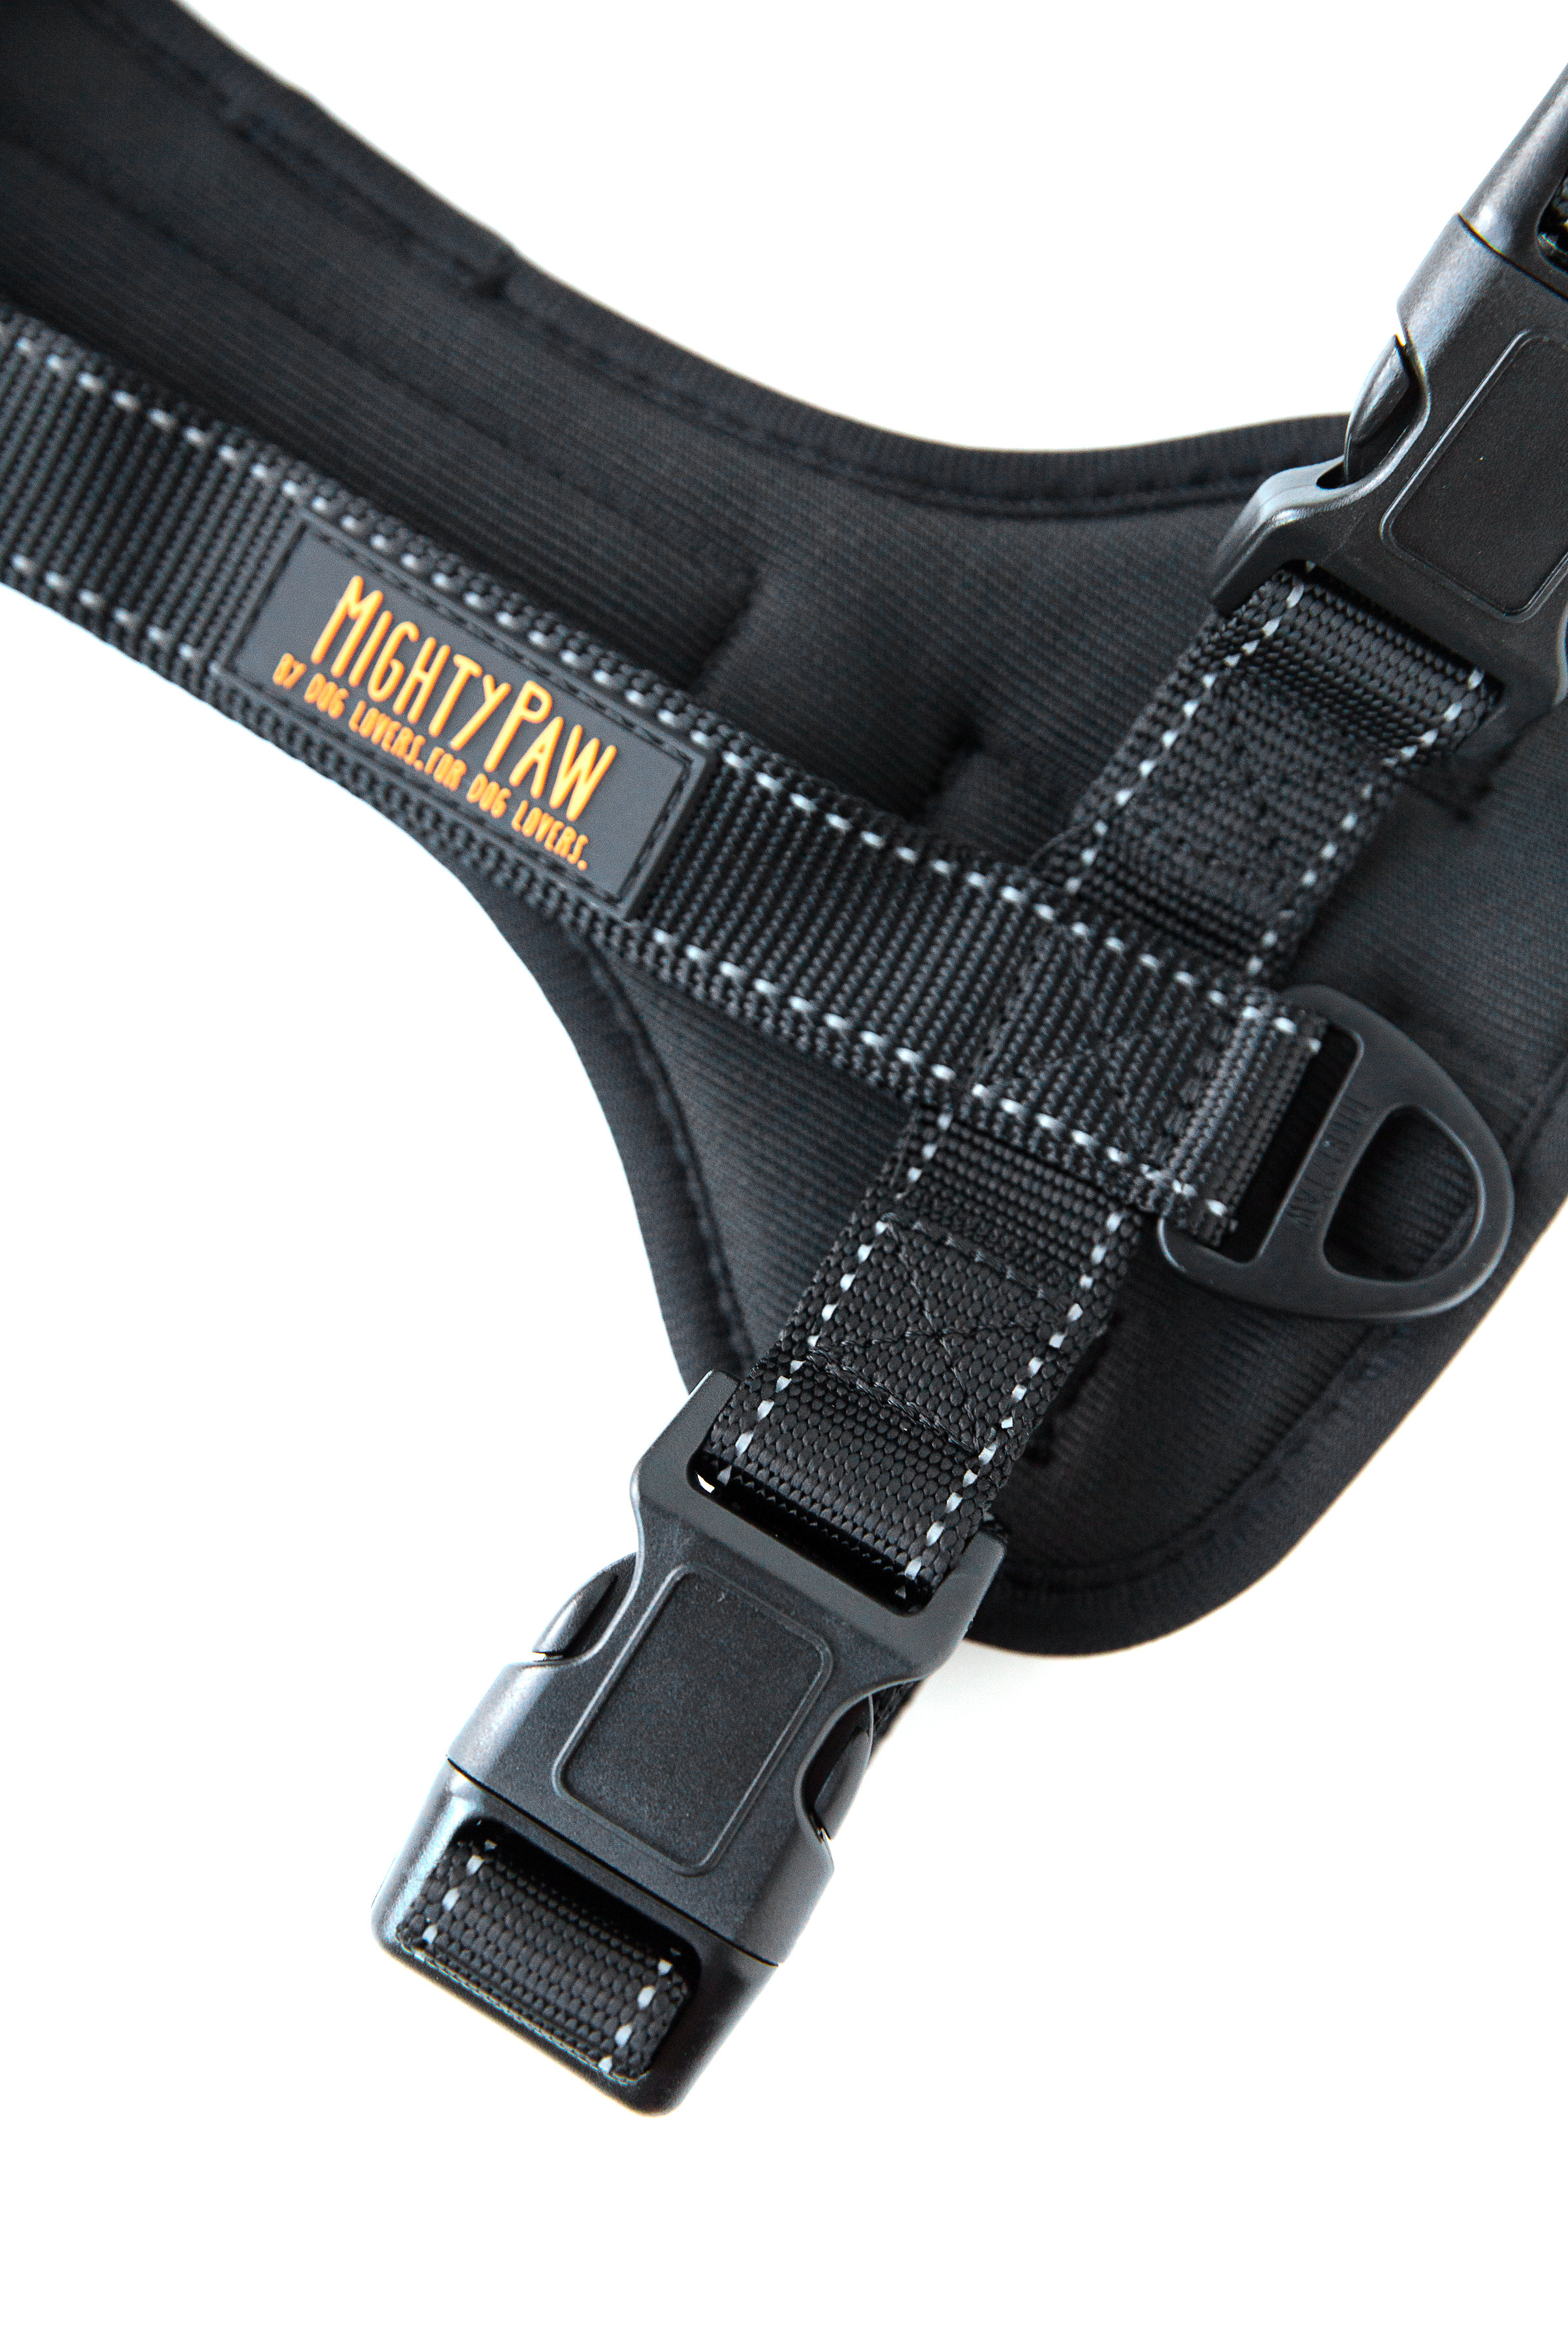 Mighty Paw All Metal Harness